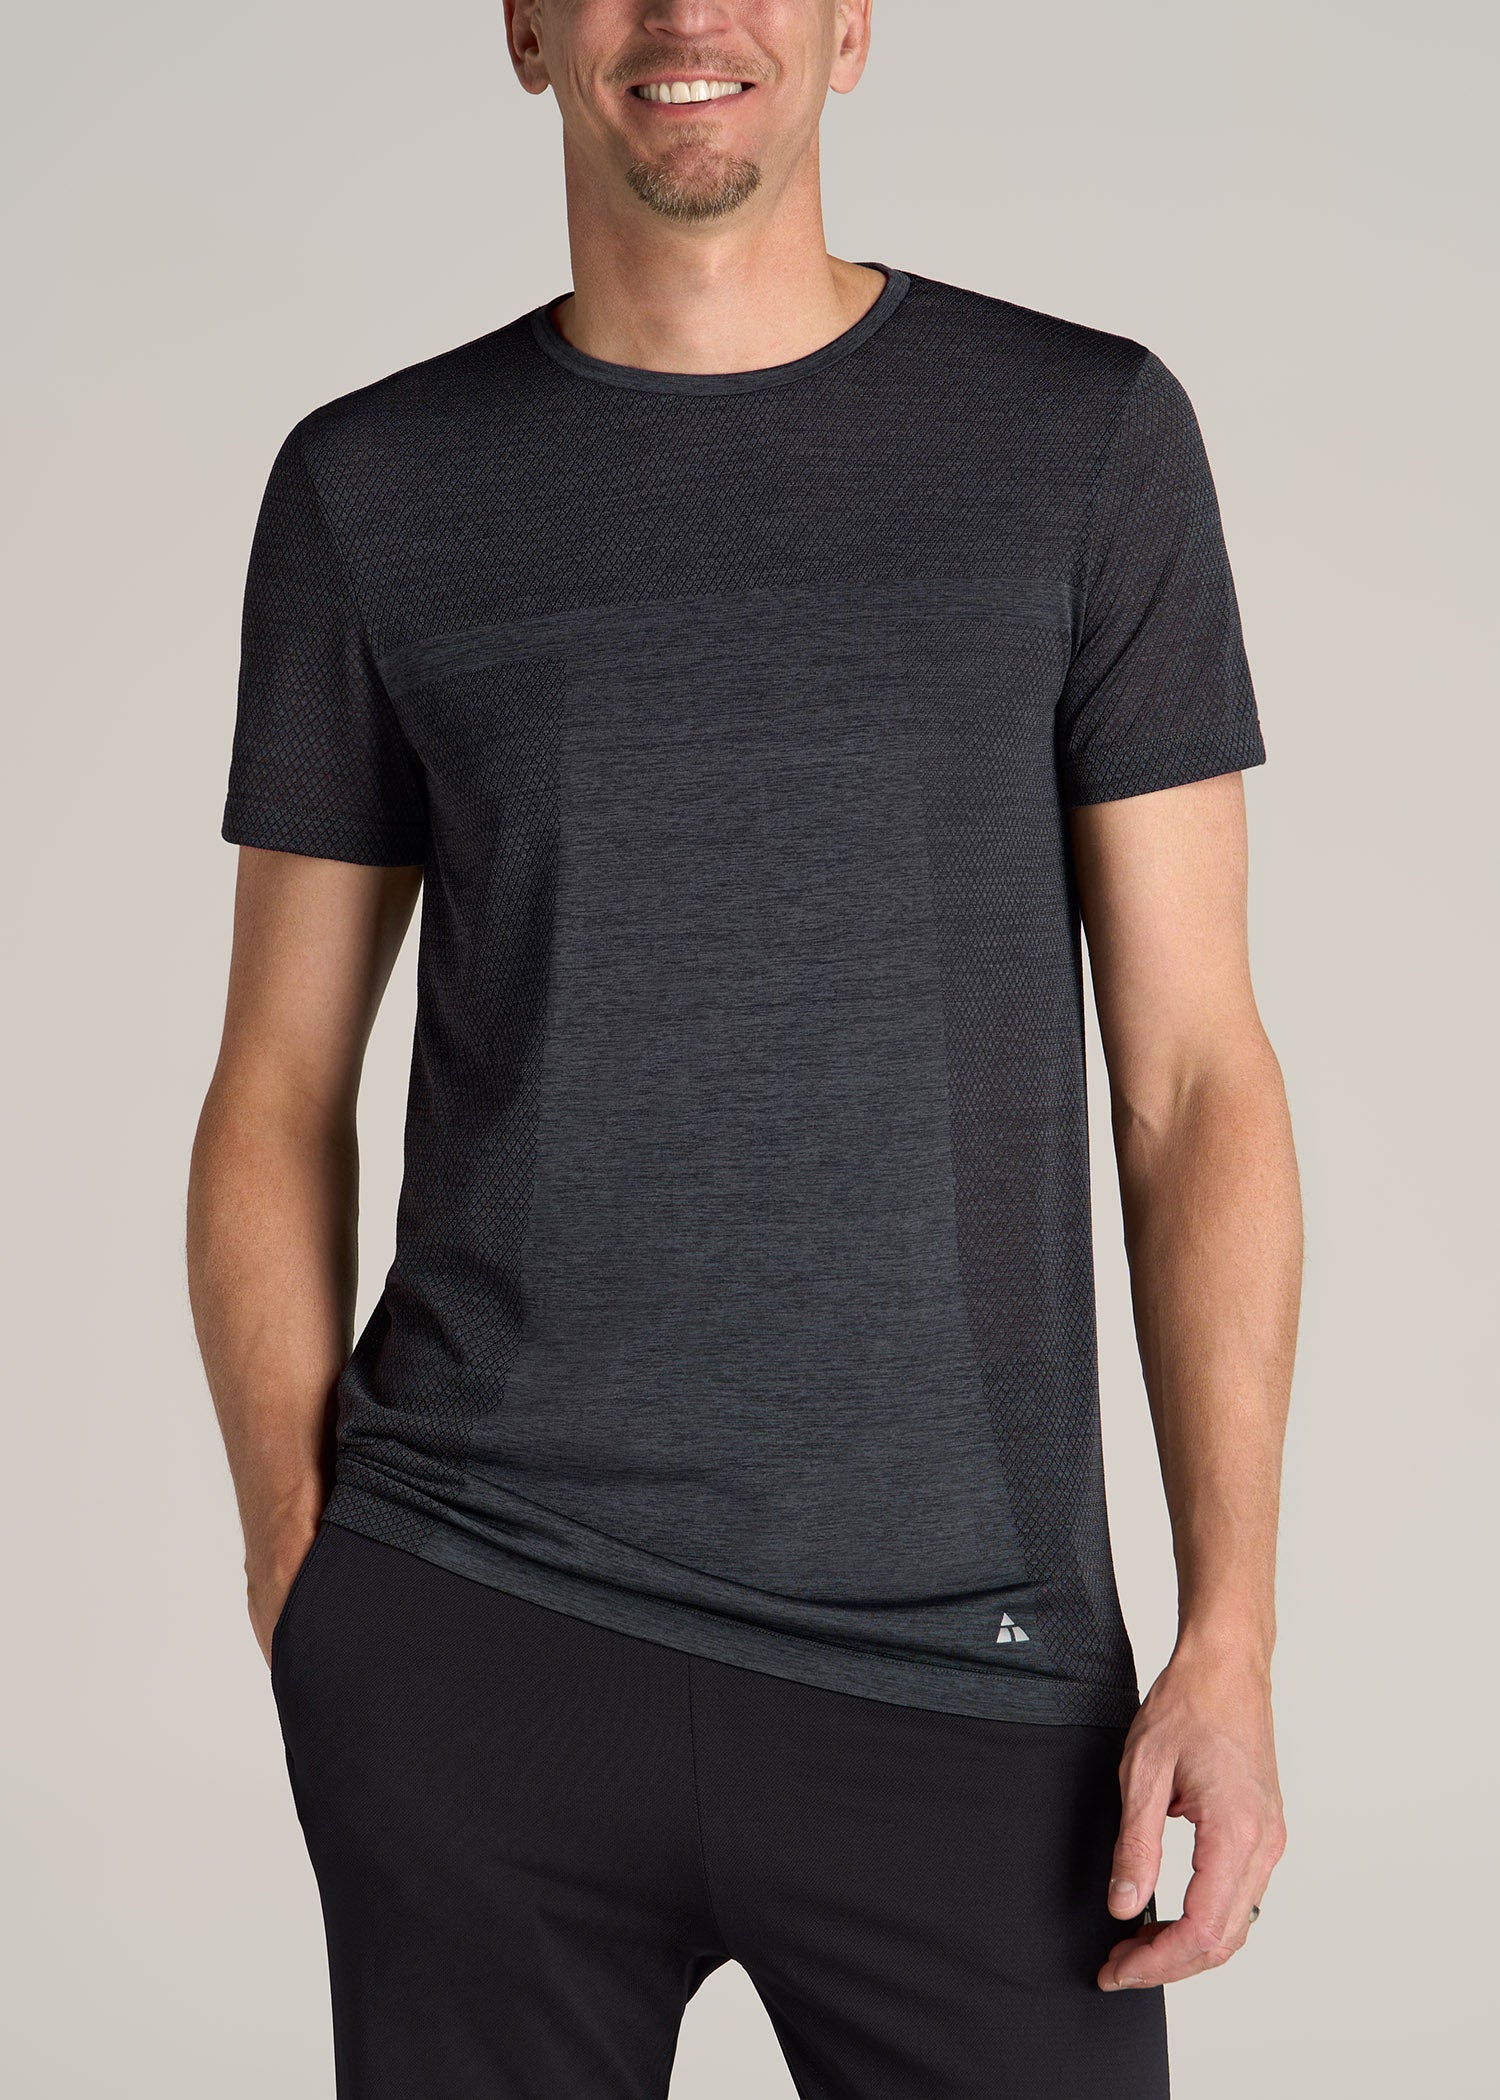 American-Tall-Men-AT-Performance-Engineered-Athletic-Tee-Charcoal-Mix-front